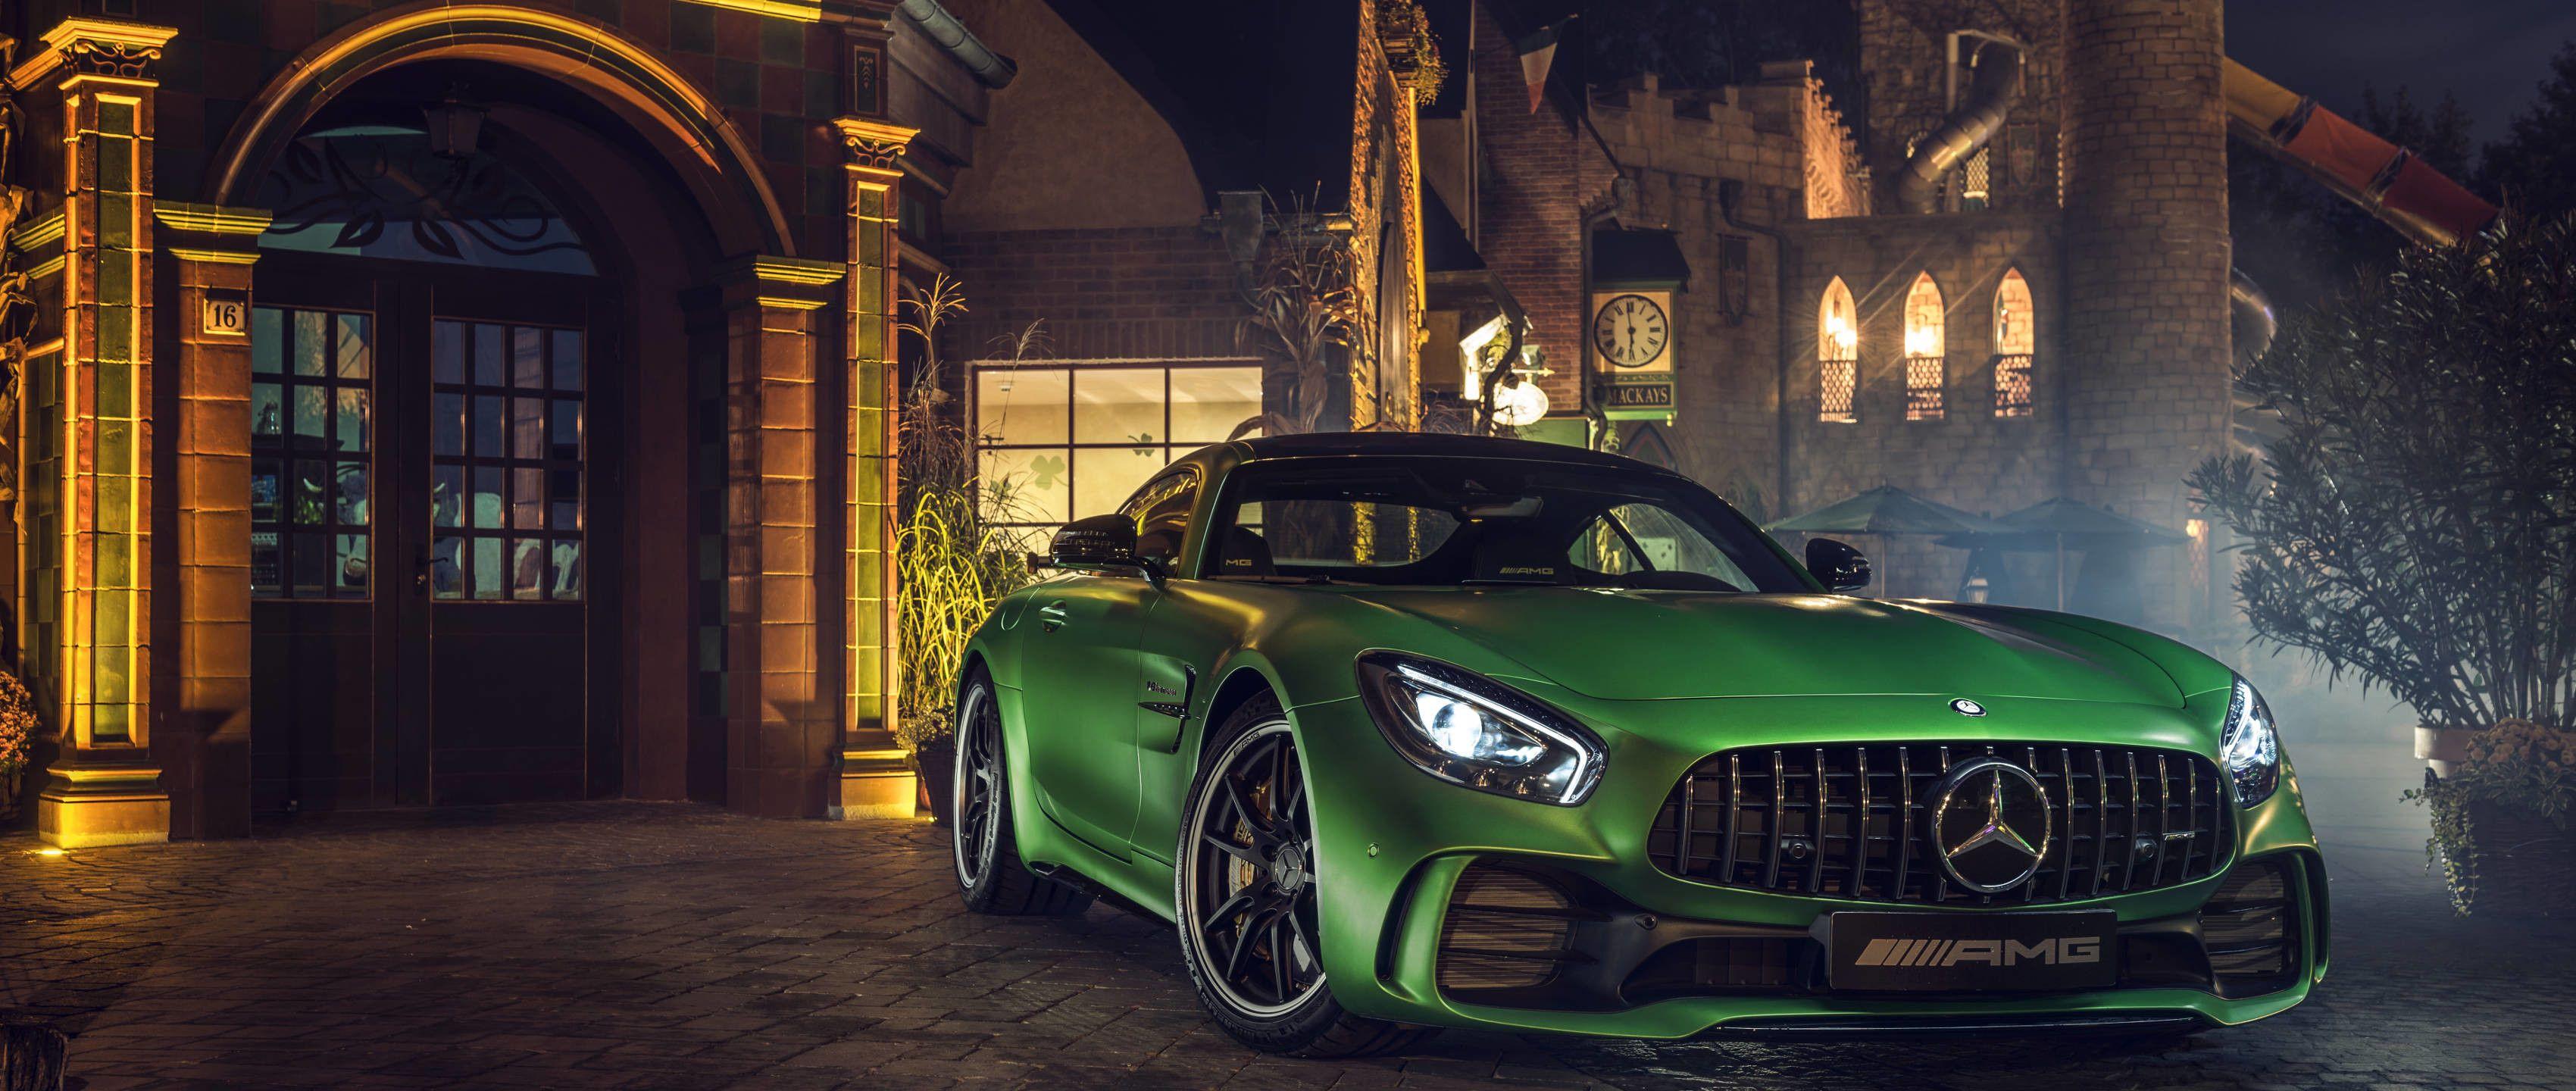 1920x1080 Green Mercedes Benz Amg GT Laptop Full HD 1080P HD 4k Wallpapers  Images Backgrounds Photos and Pictures